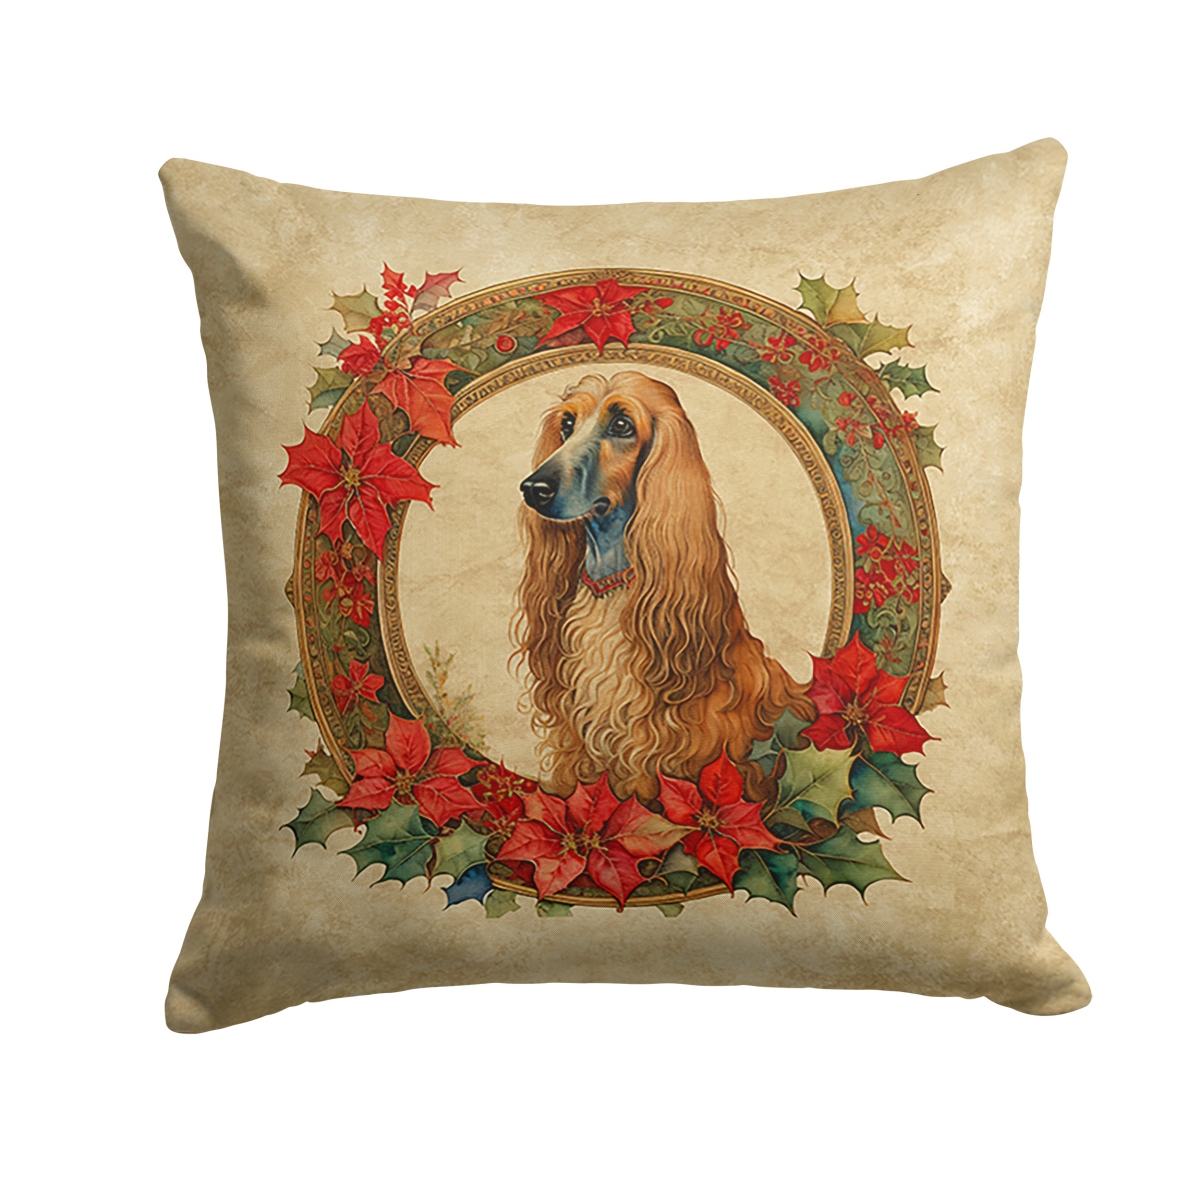 Caroline's Treasures DAC2295PW1818 18 x 18 in. Unisex Afghan Hound Christmas Flowers Polyester Fabric Throw Pillow